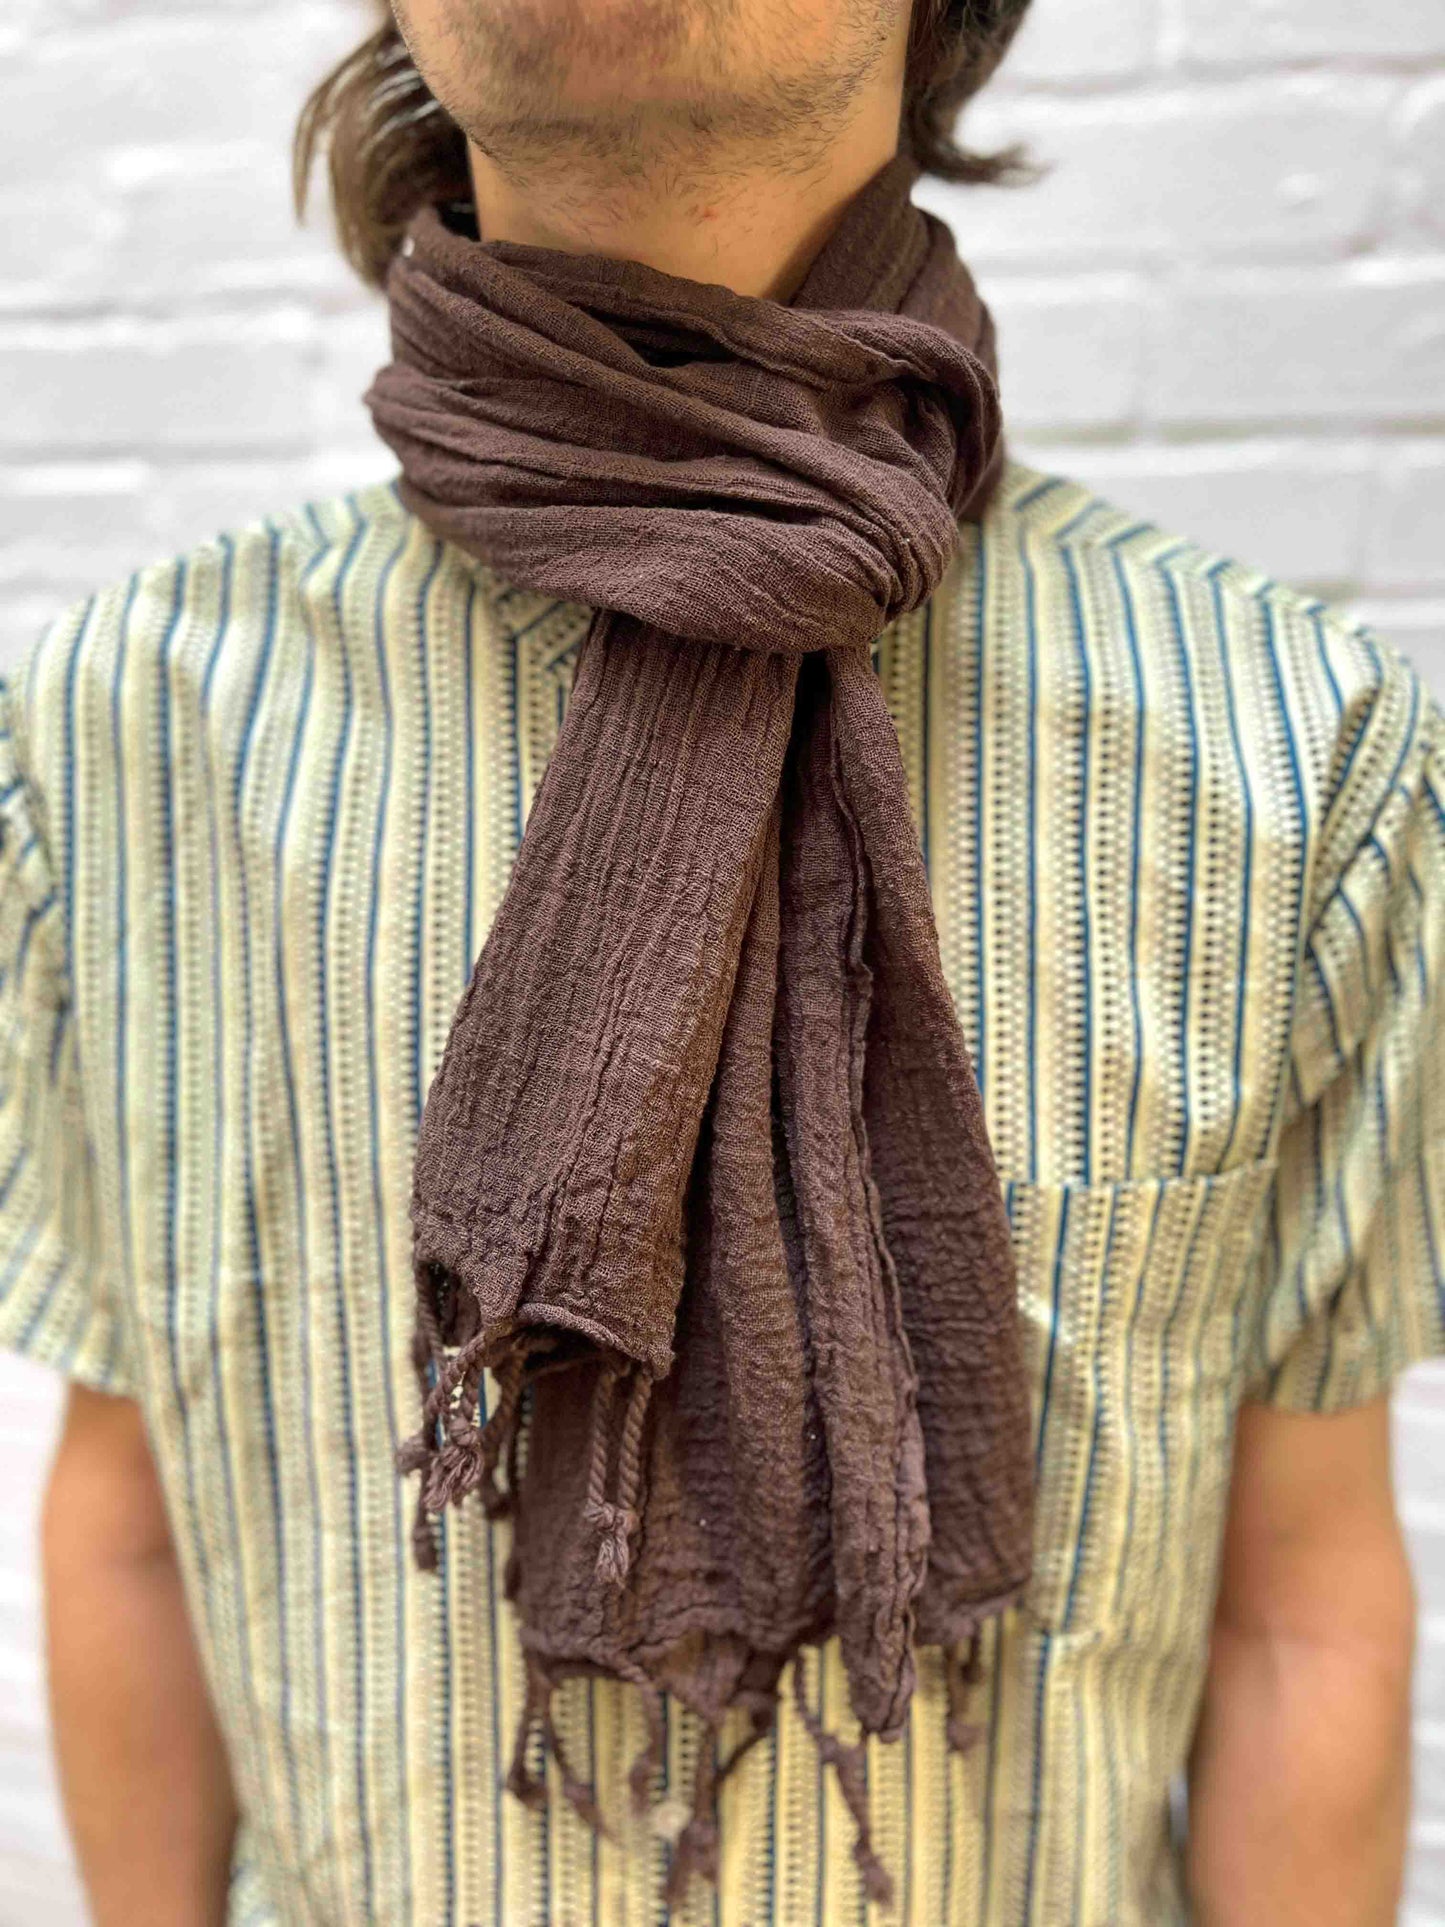 Chocolate brown scarf with tassels